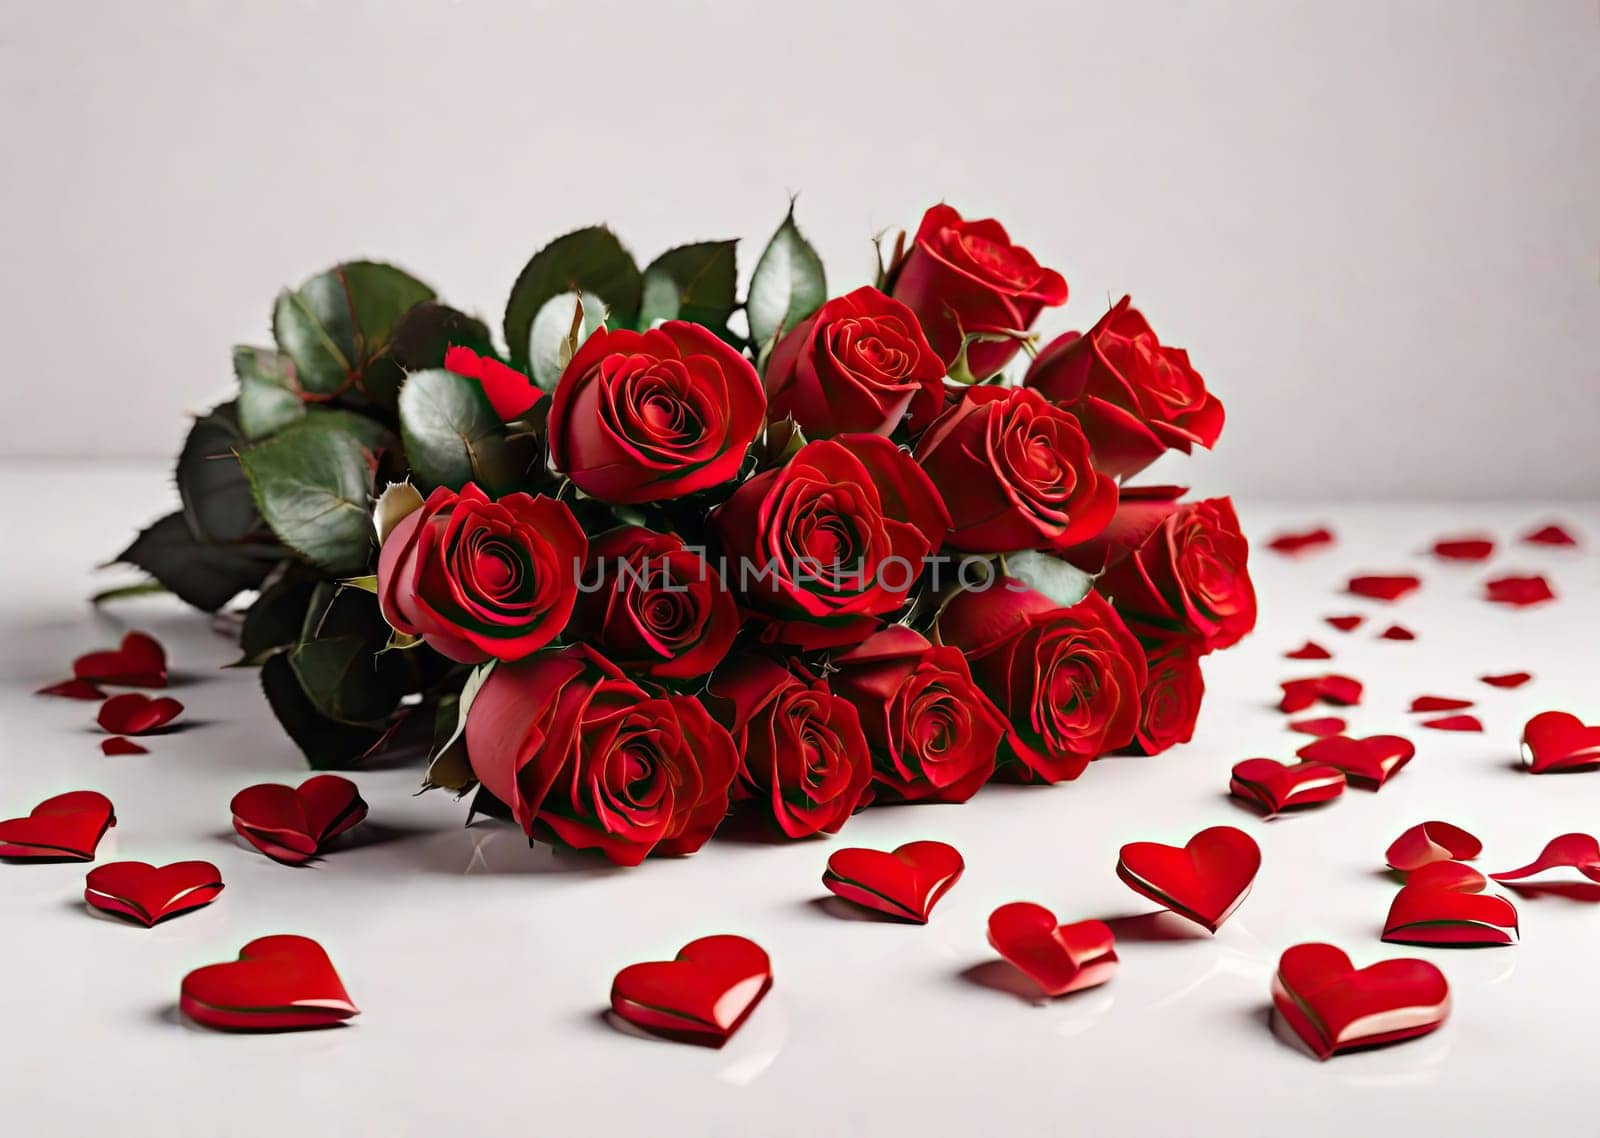 bouquet of beautiful red roses and red hearts by Ladouski